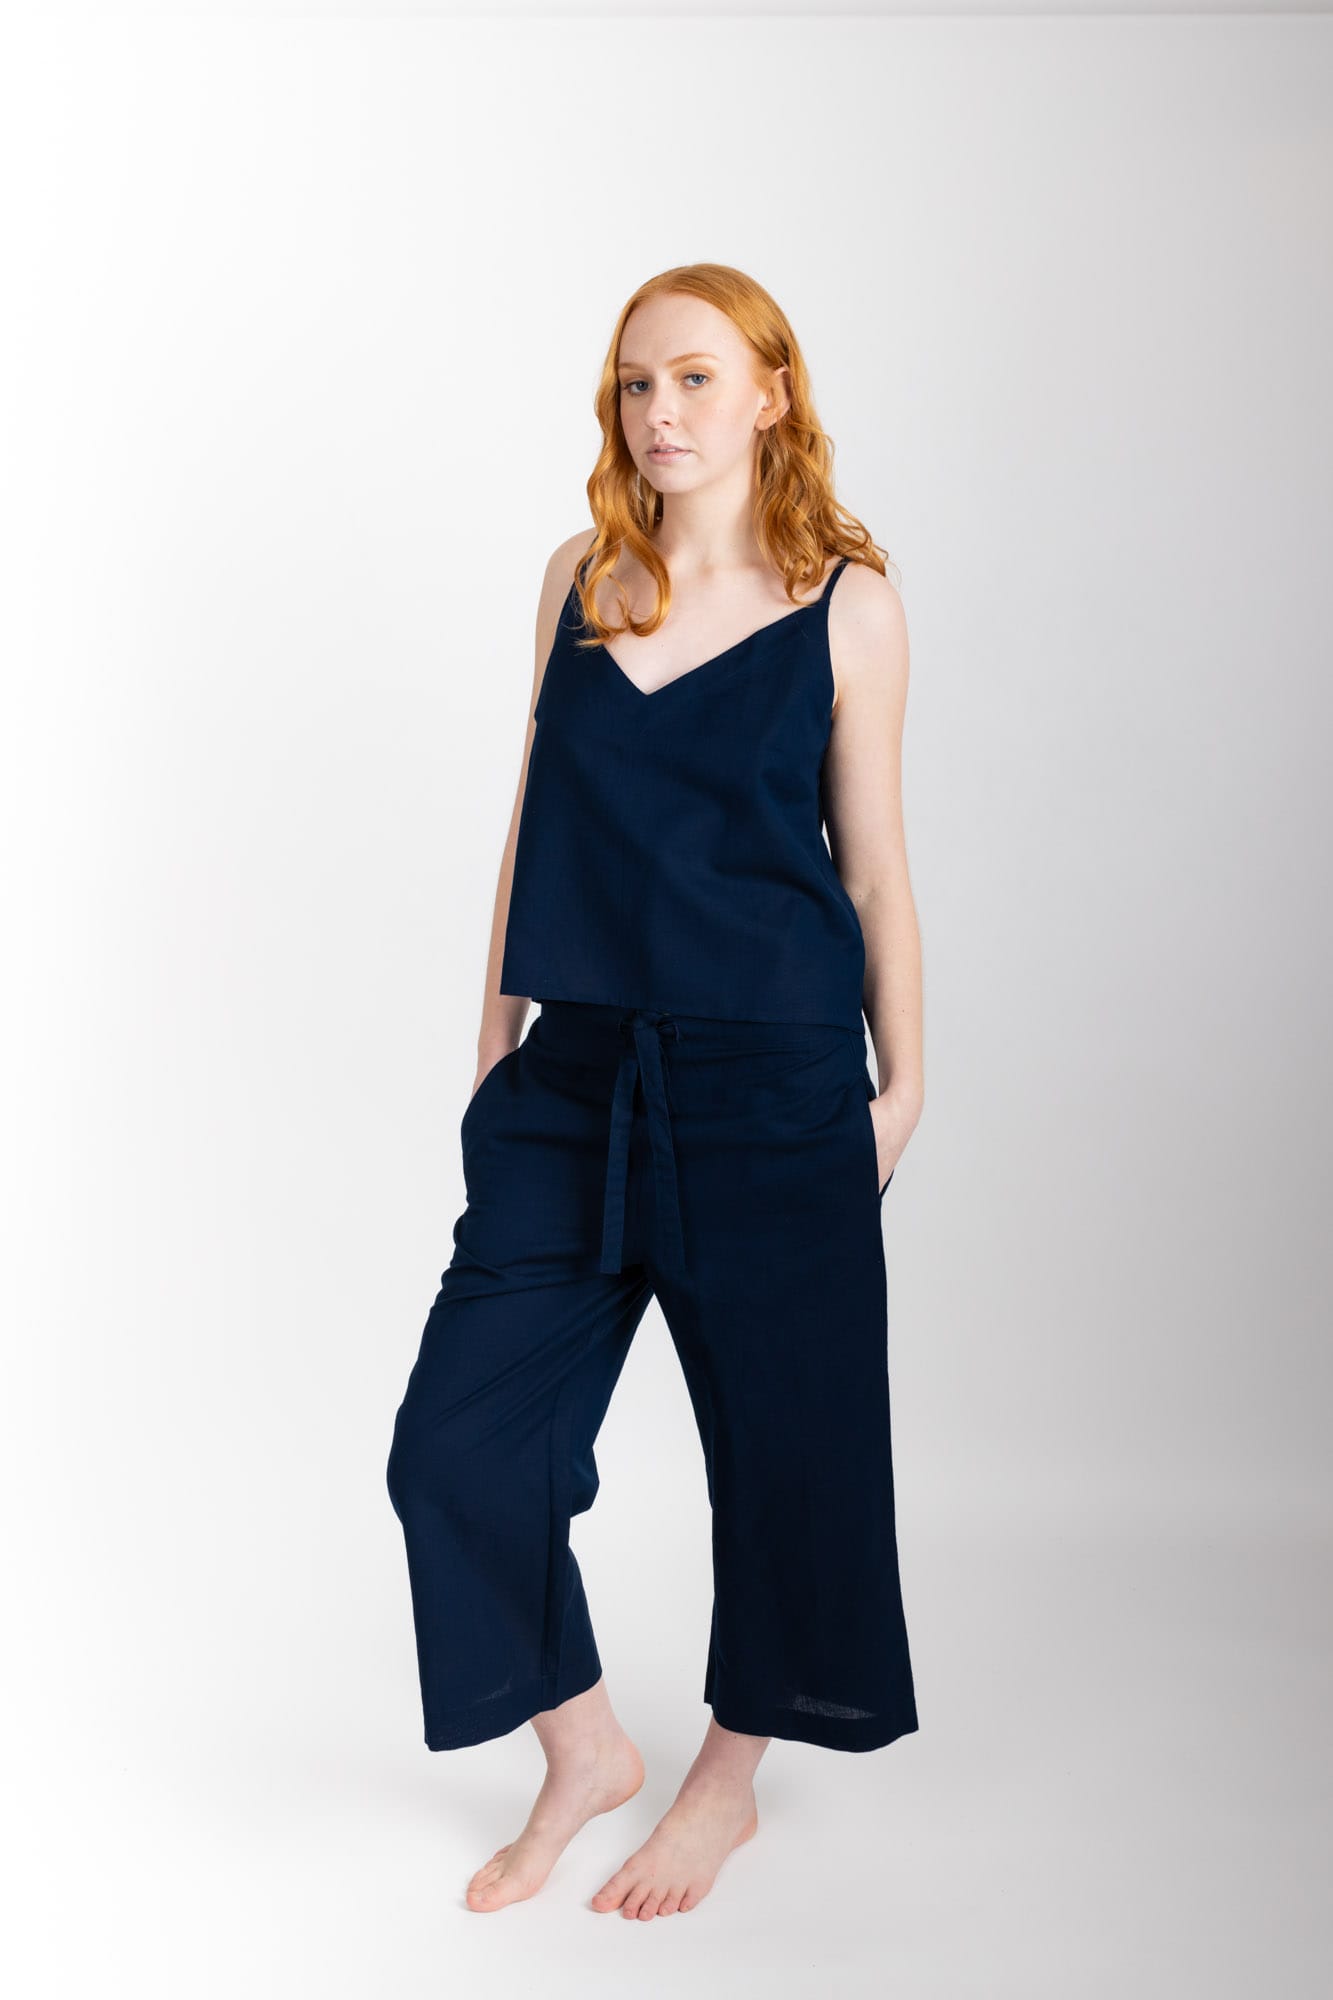 Women’s sleepwear set featuring a V-neck, swing-style camisole with adjustable straps. Paired with straight-leg cropped pant with an elasticated waist, flat front, and drawstring detail, these pants are comfortable and flattering. Woven in 100% organic cotton, both pieces have been finished with French seams.